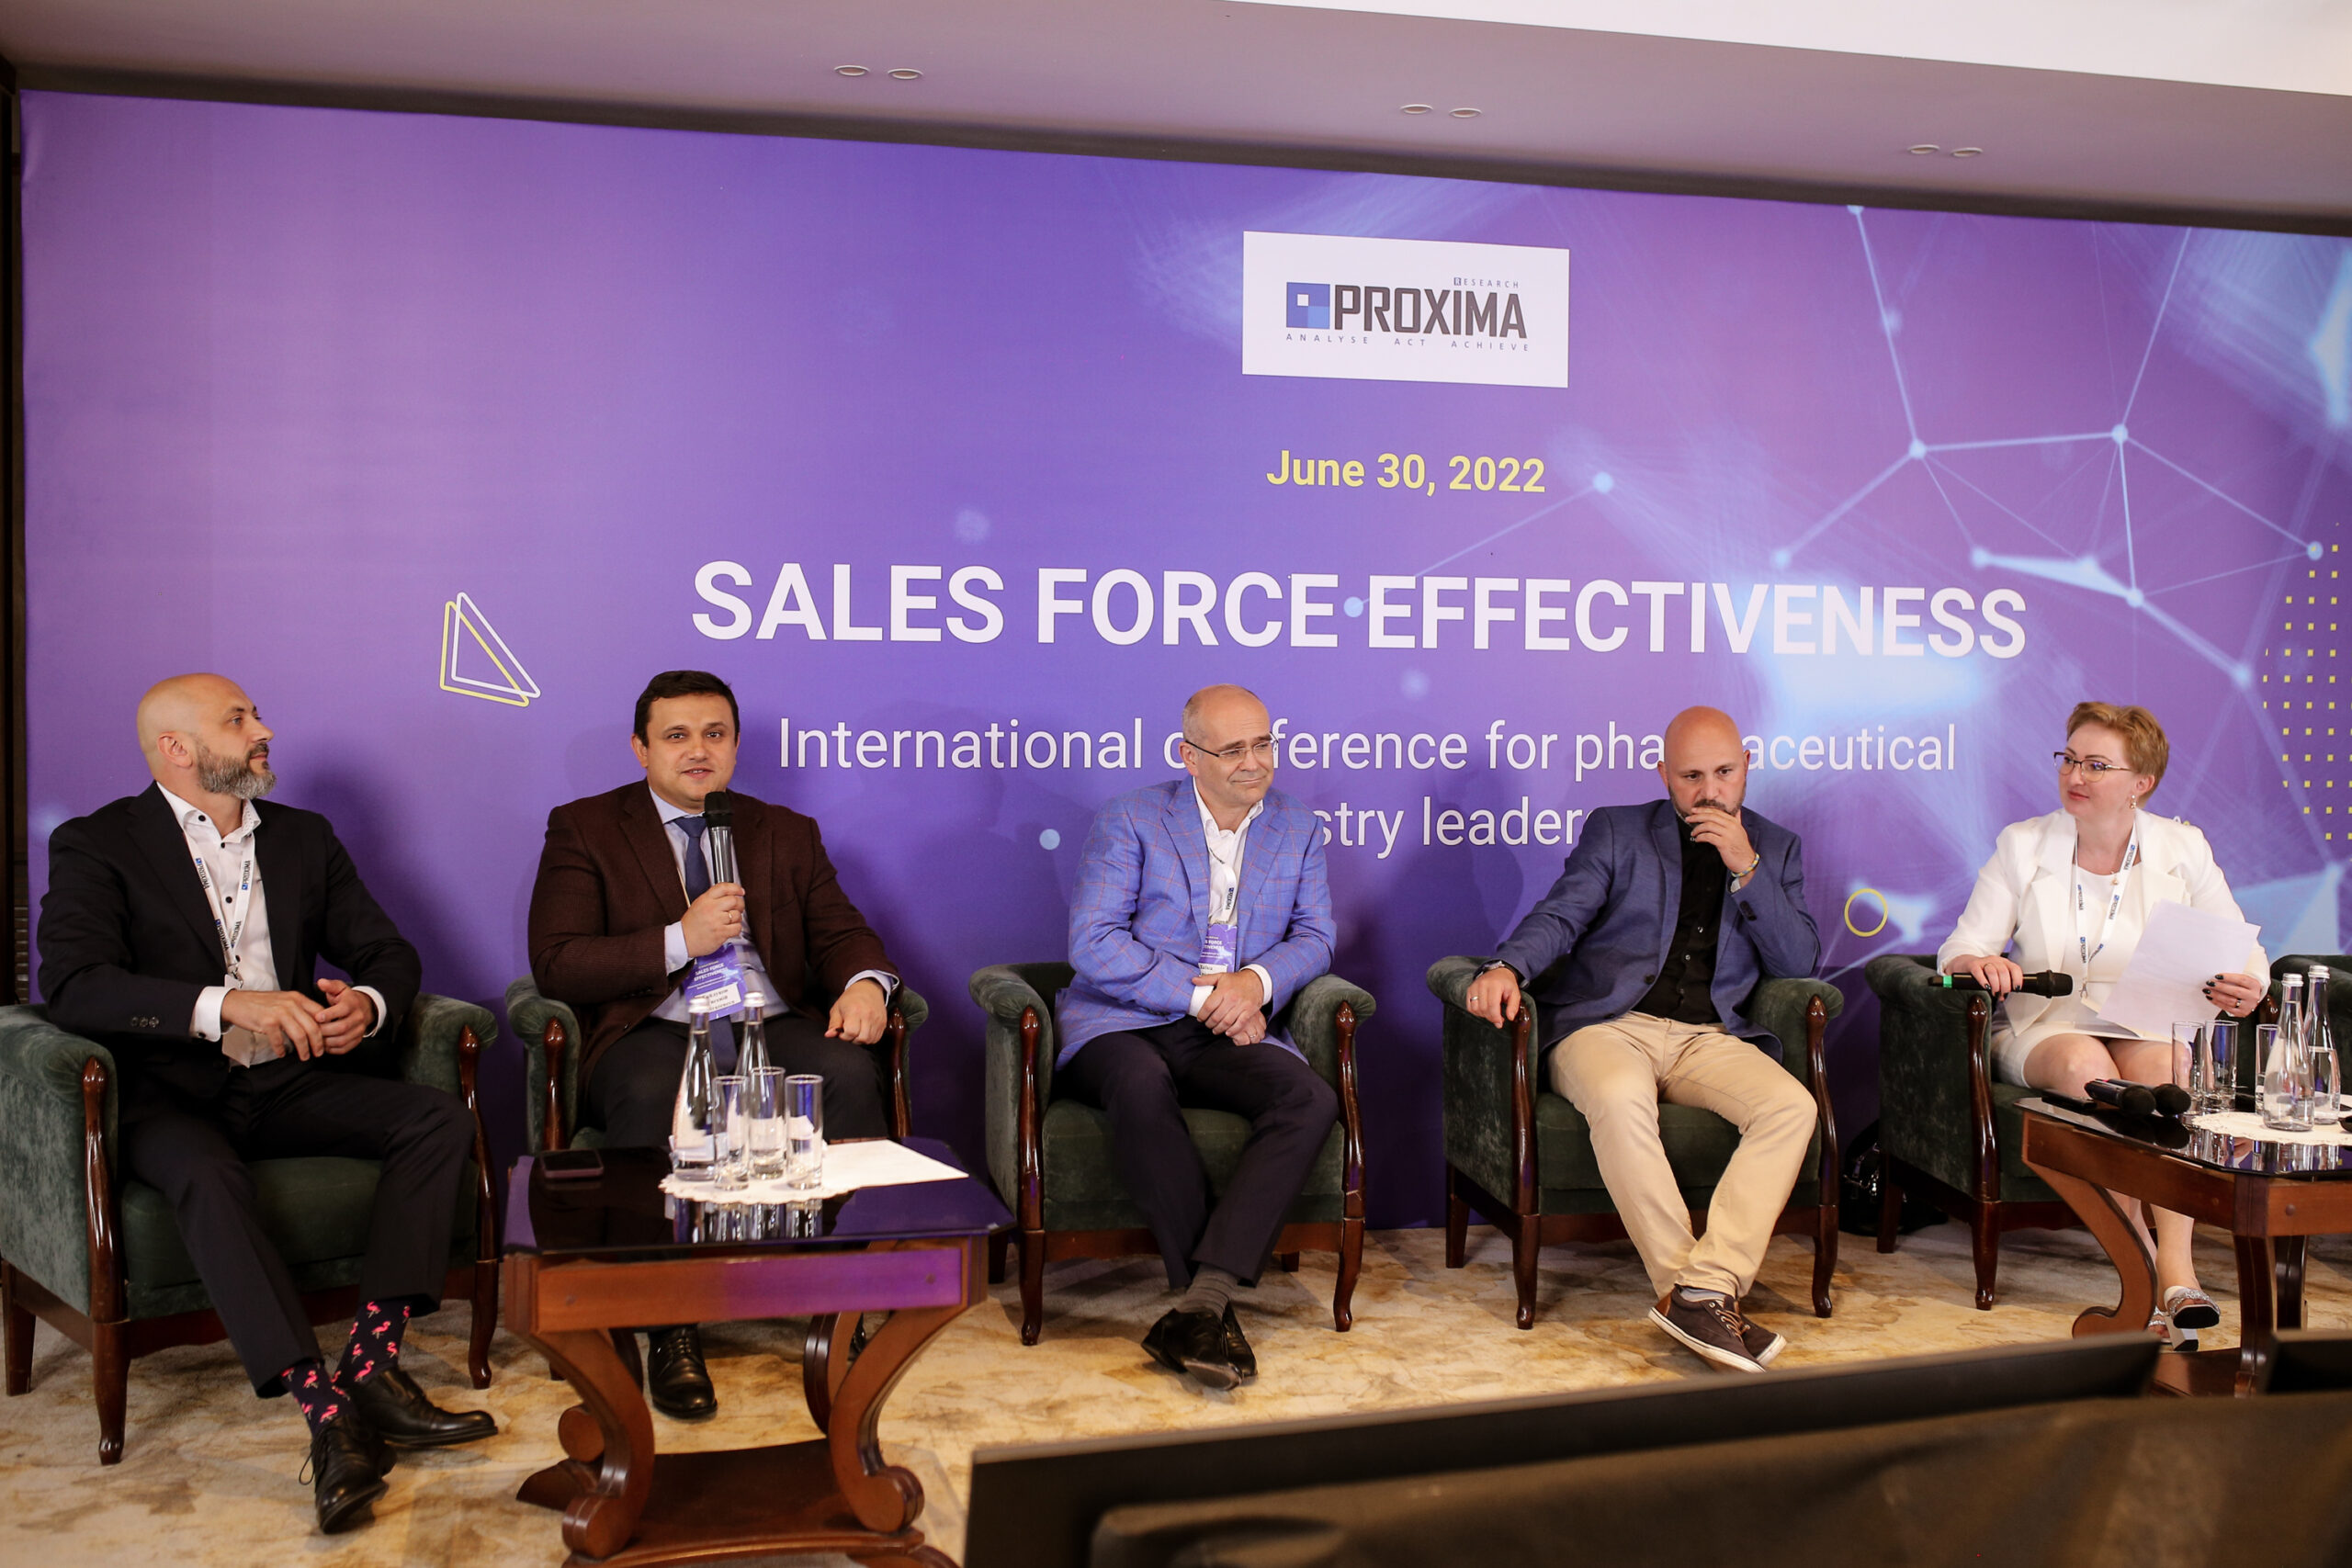 THE 13TH INTERNATIONAL CONFERENCE SALES FORCE EFFECTIVENESS 2022: RESULTS